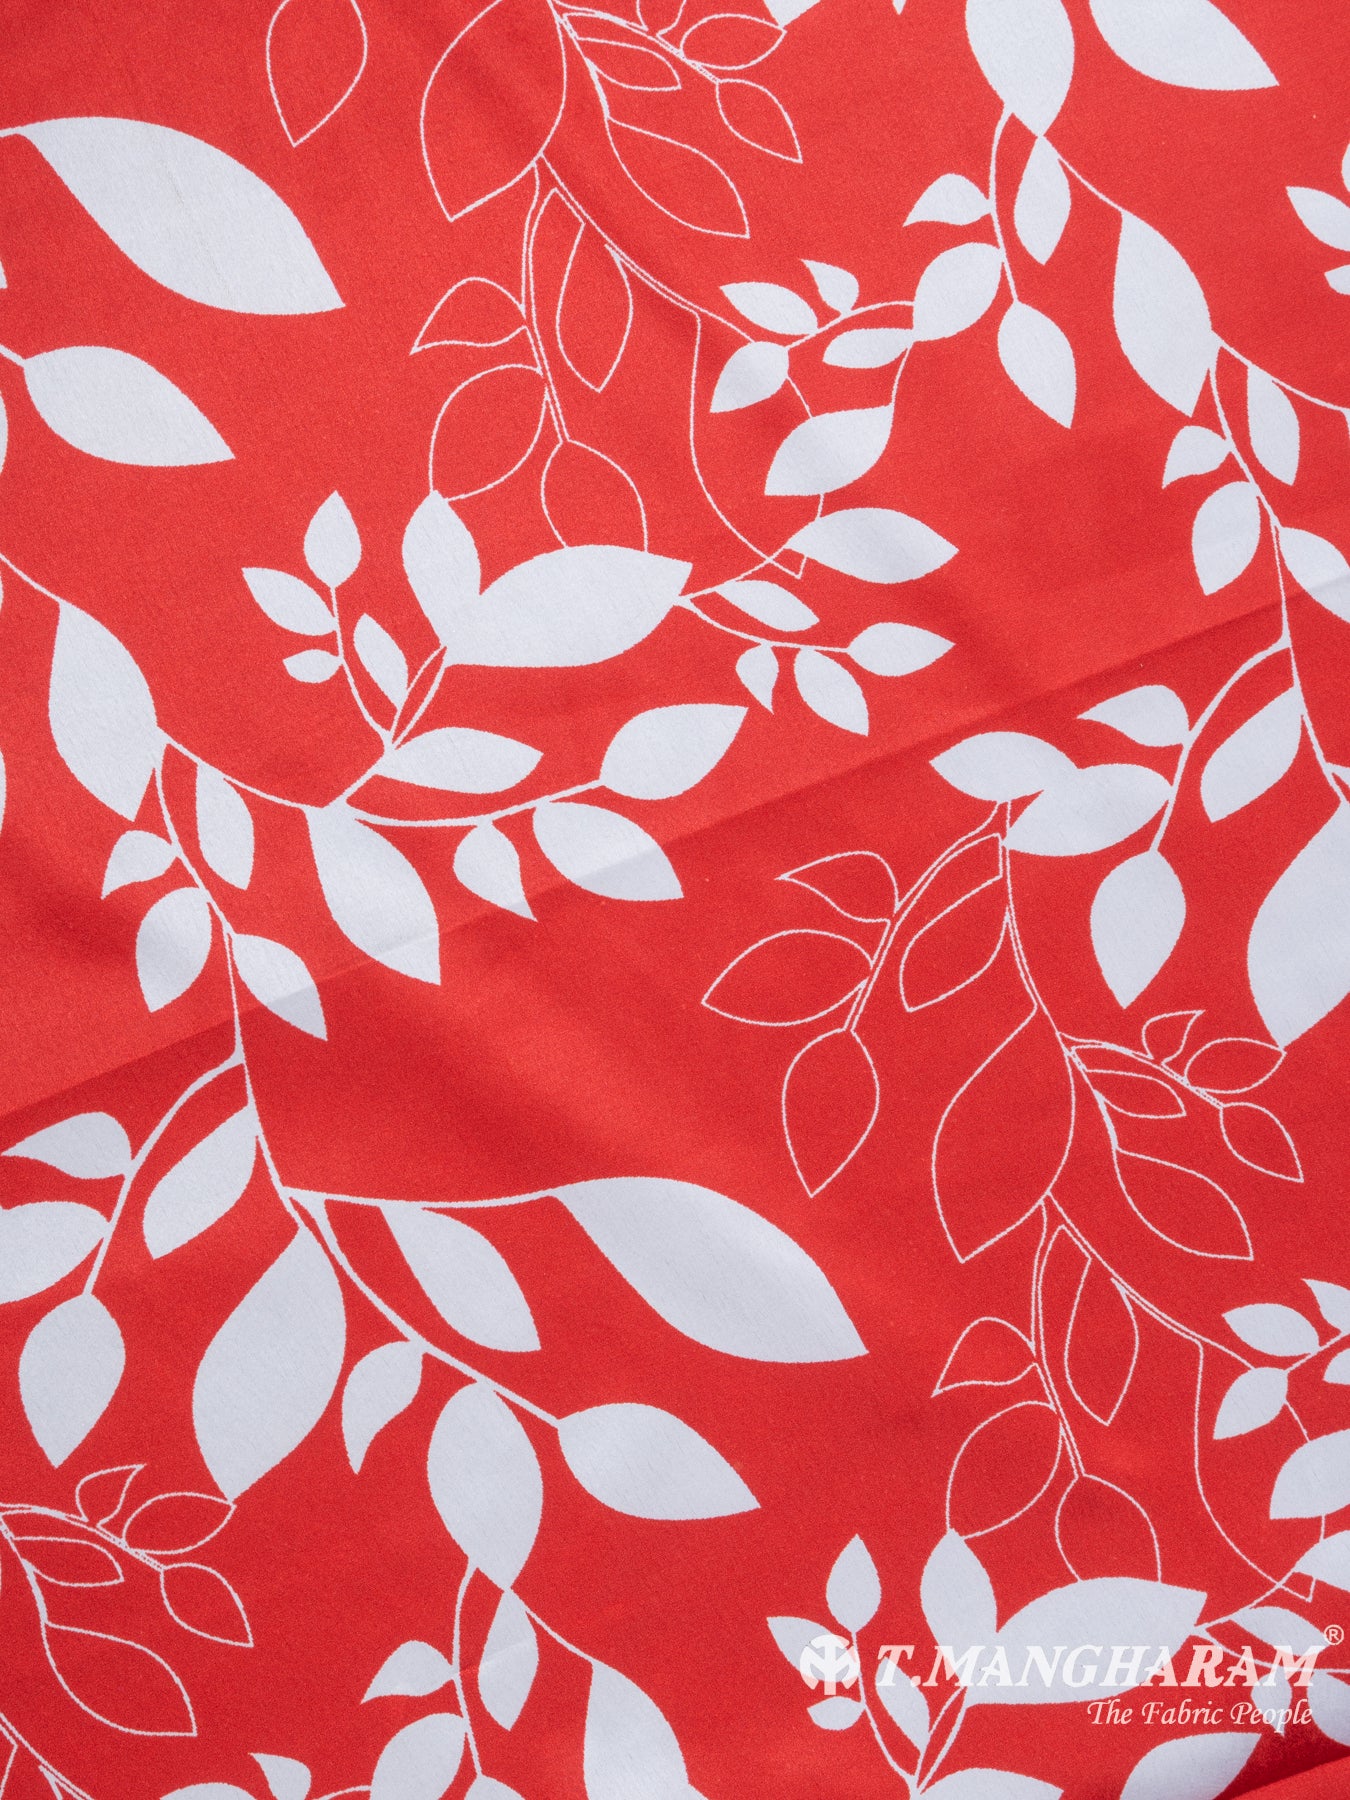 Red Modal Satin Fabric - EB5417 view-3